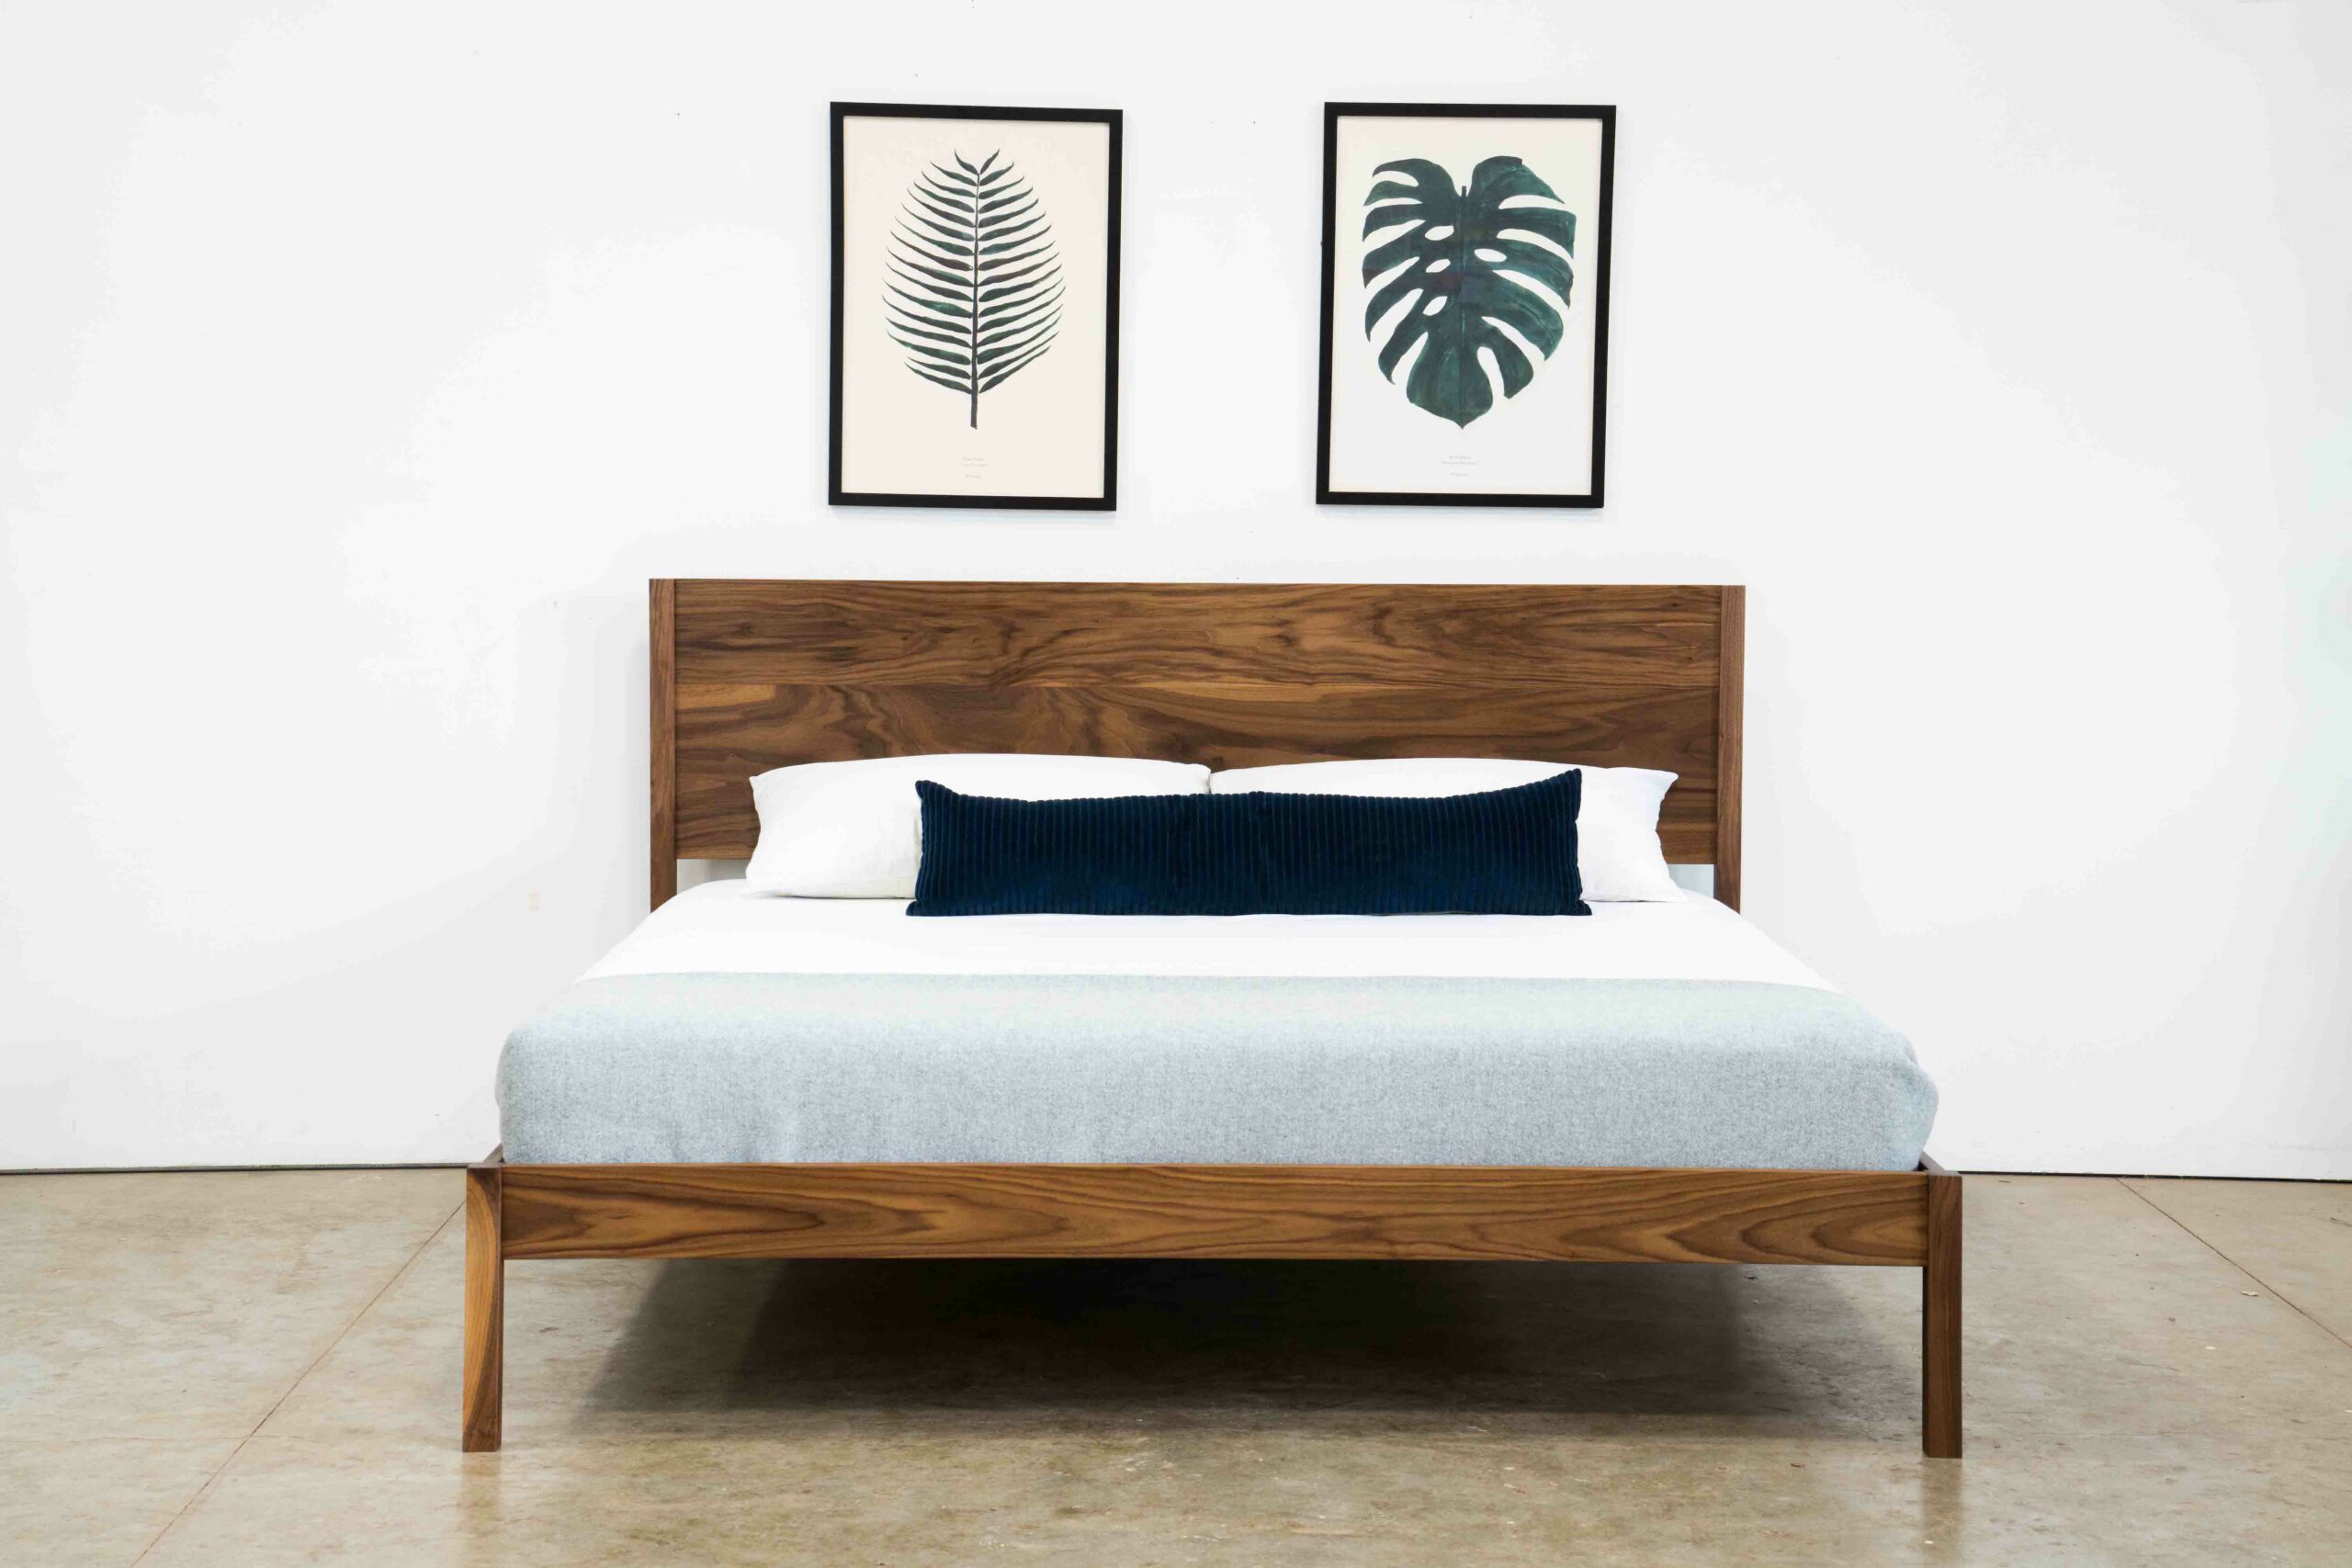 A simple platform bed made of walnut with a mattress and pillows.